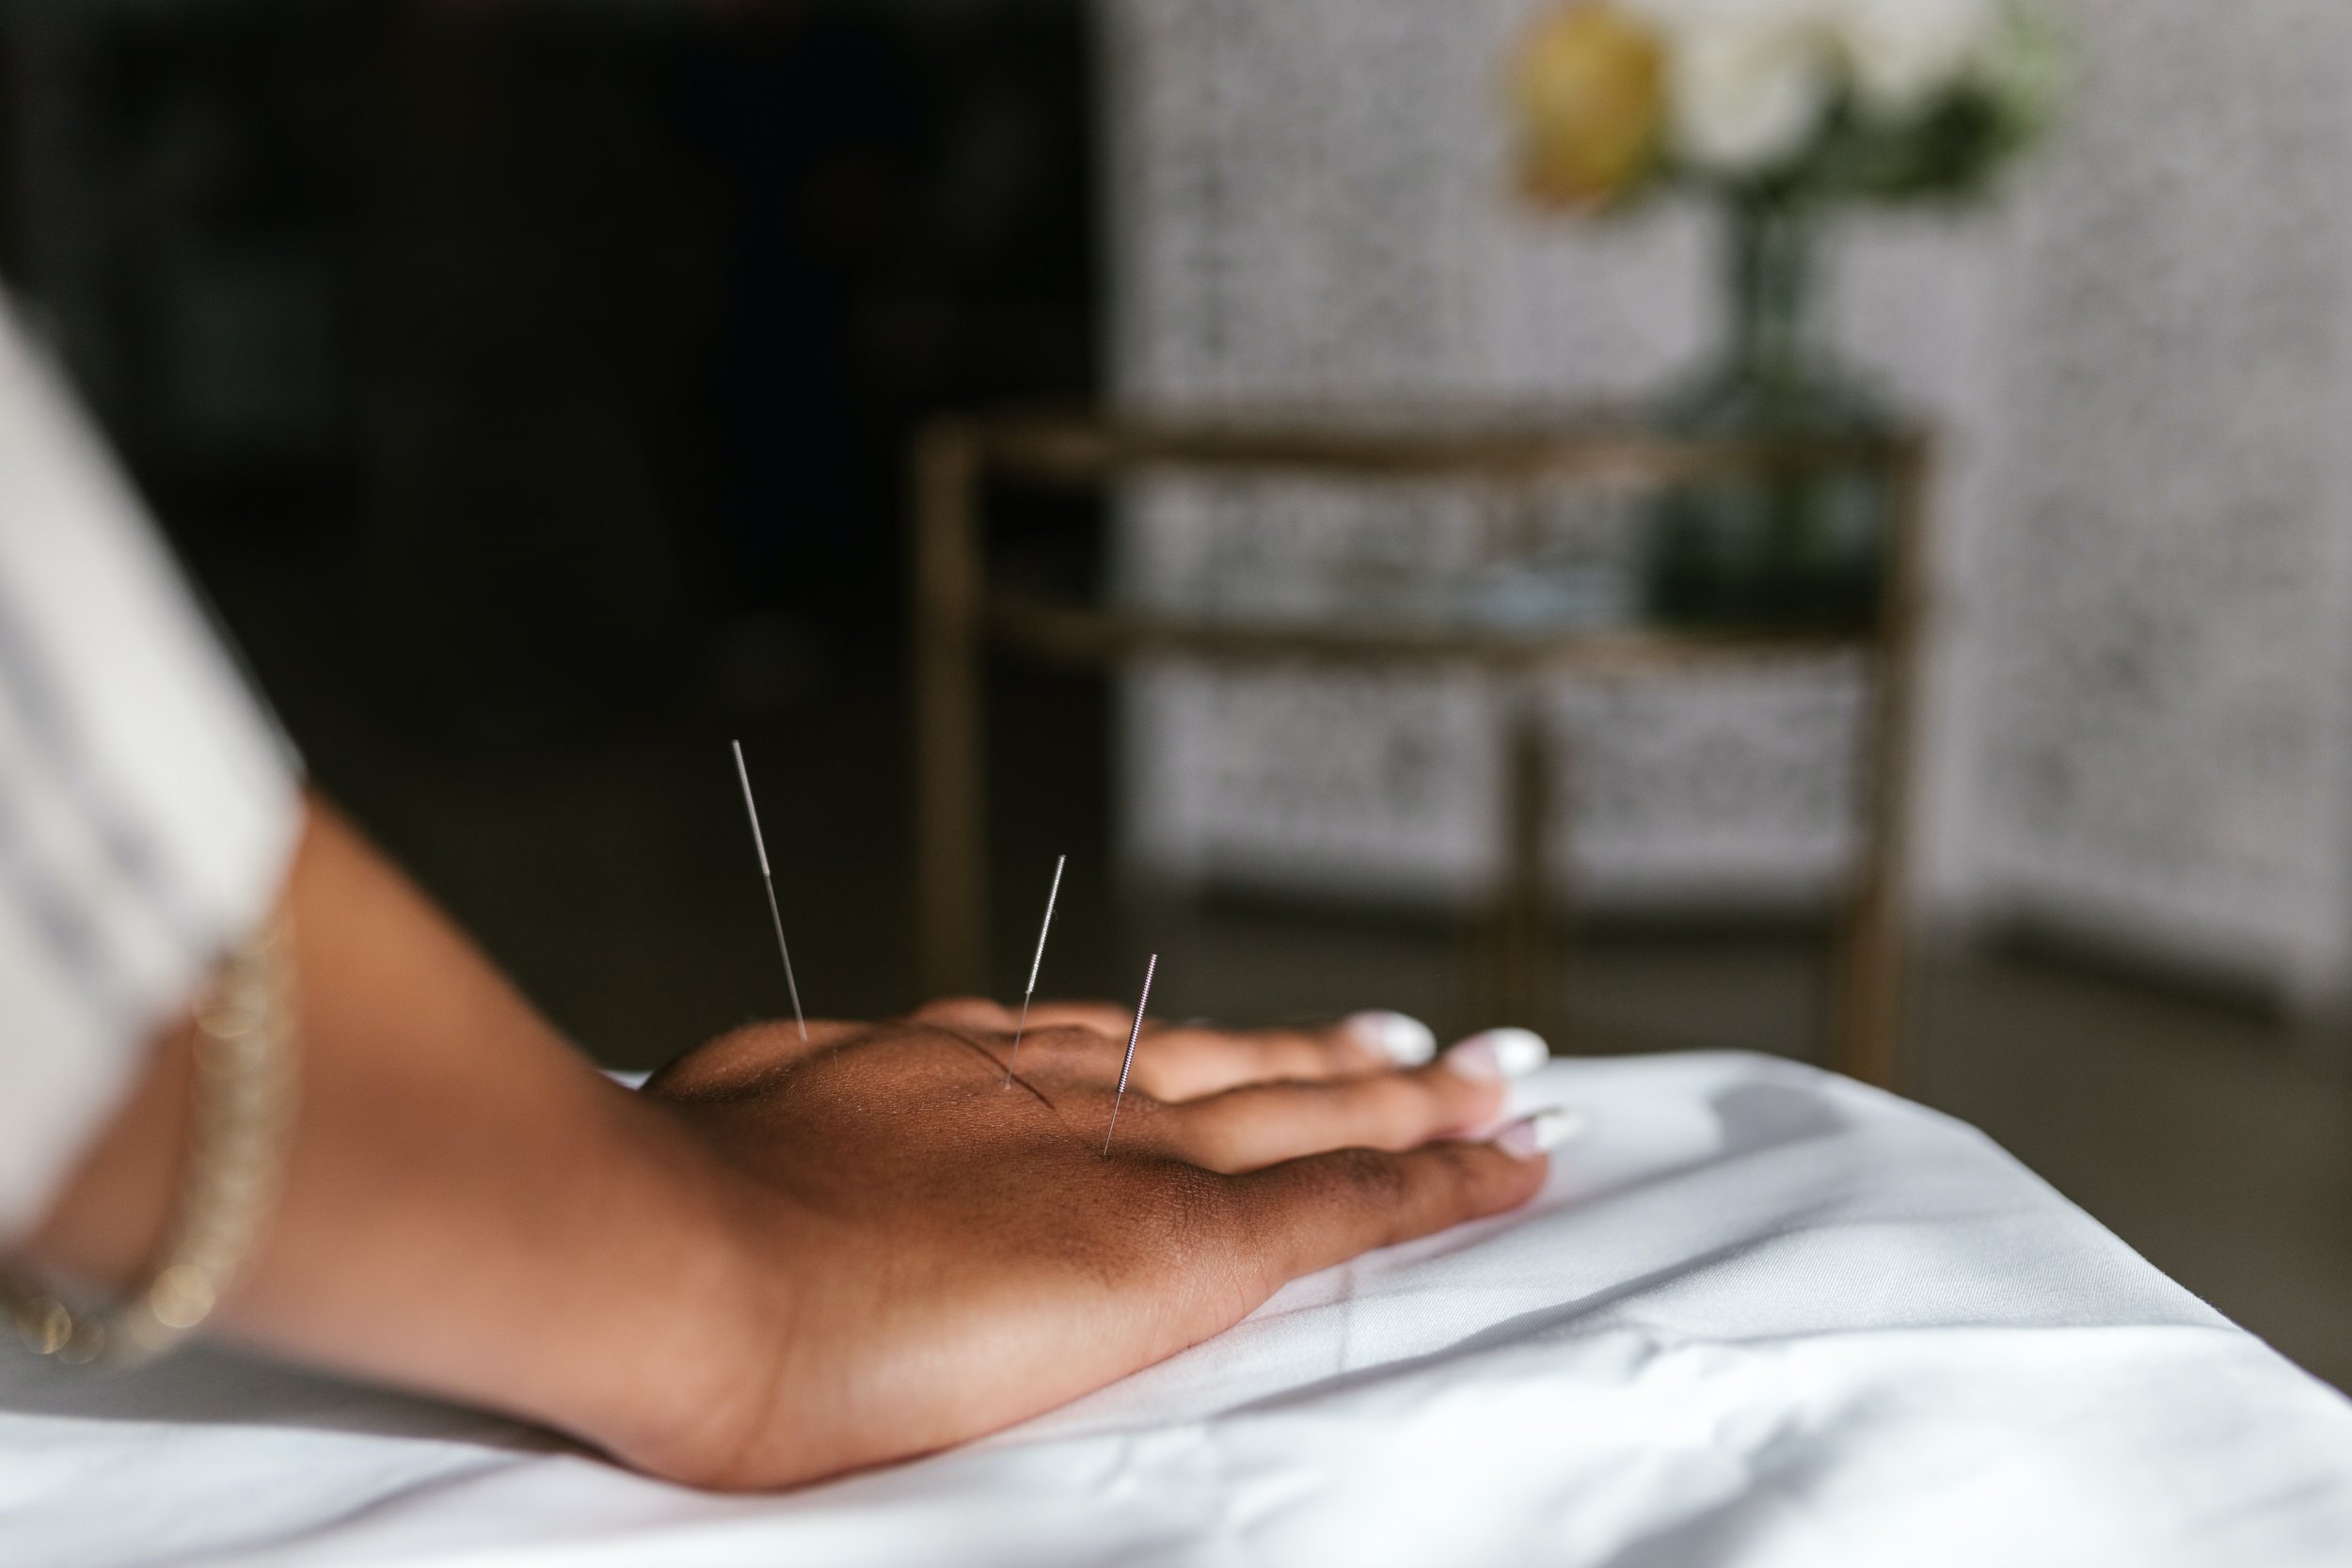 A woman's hand with acupuncture needles. (Copy)